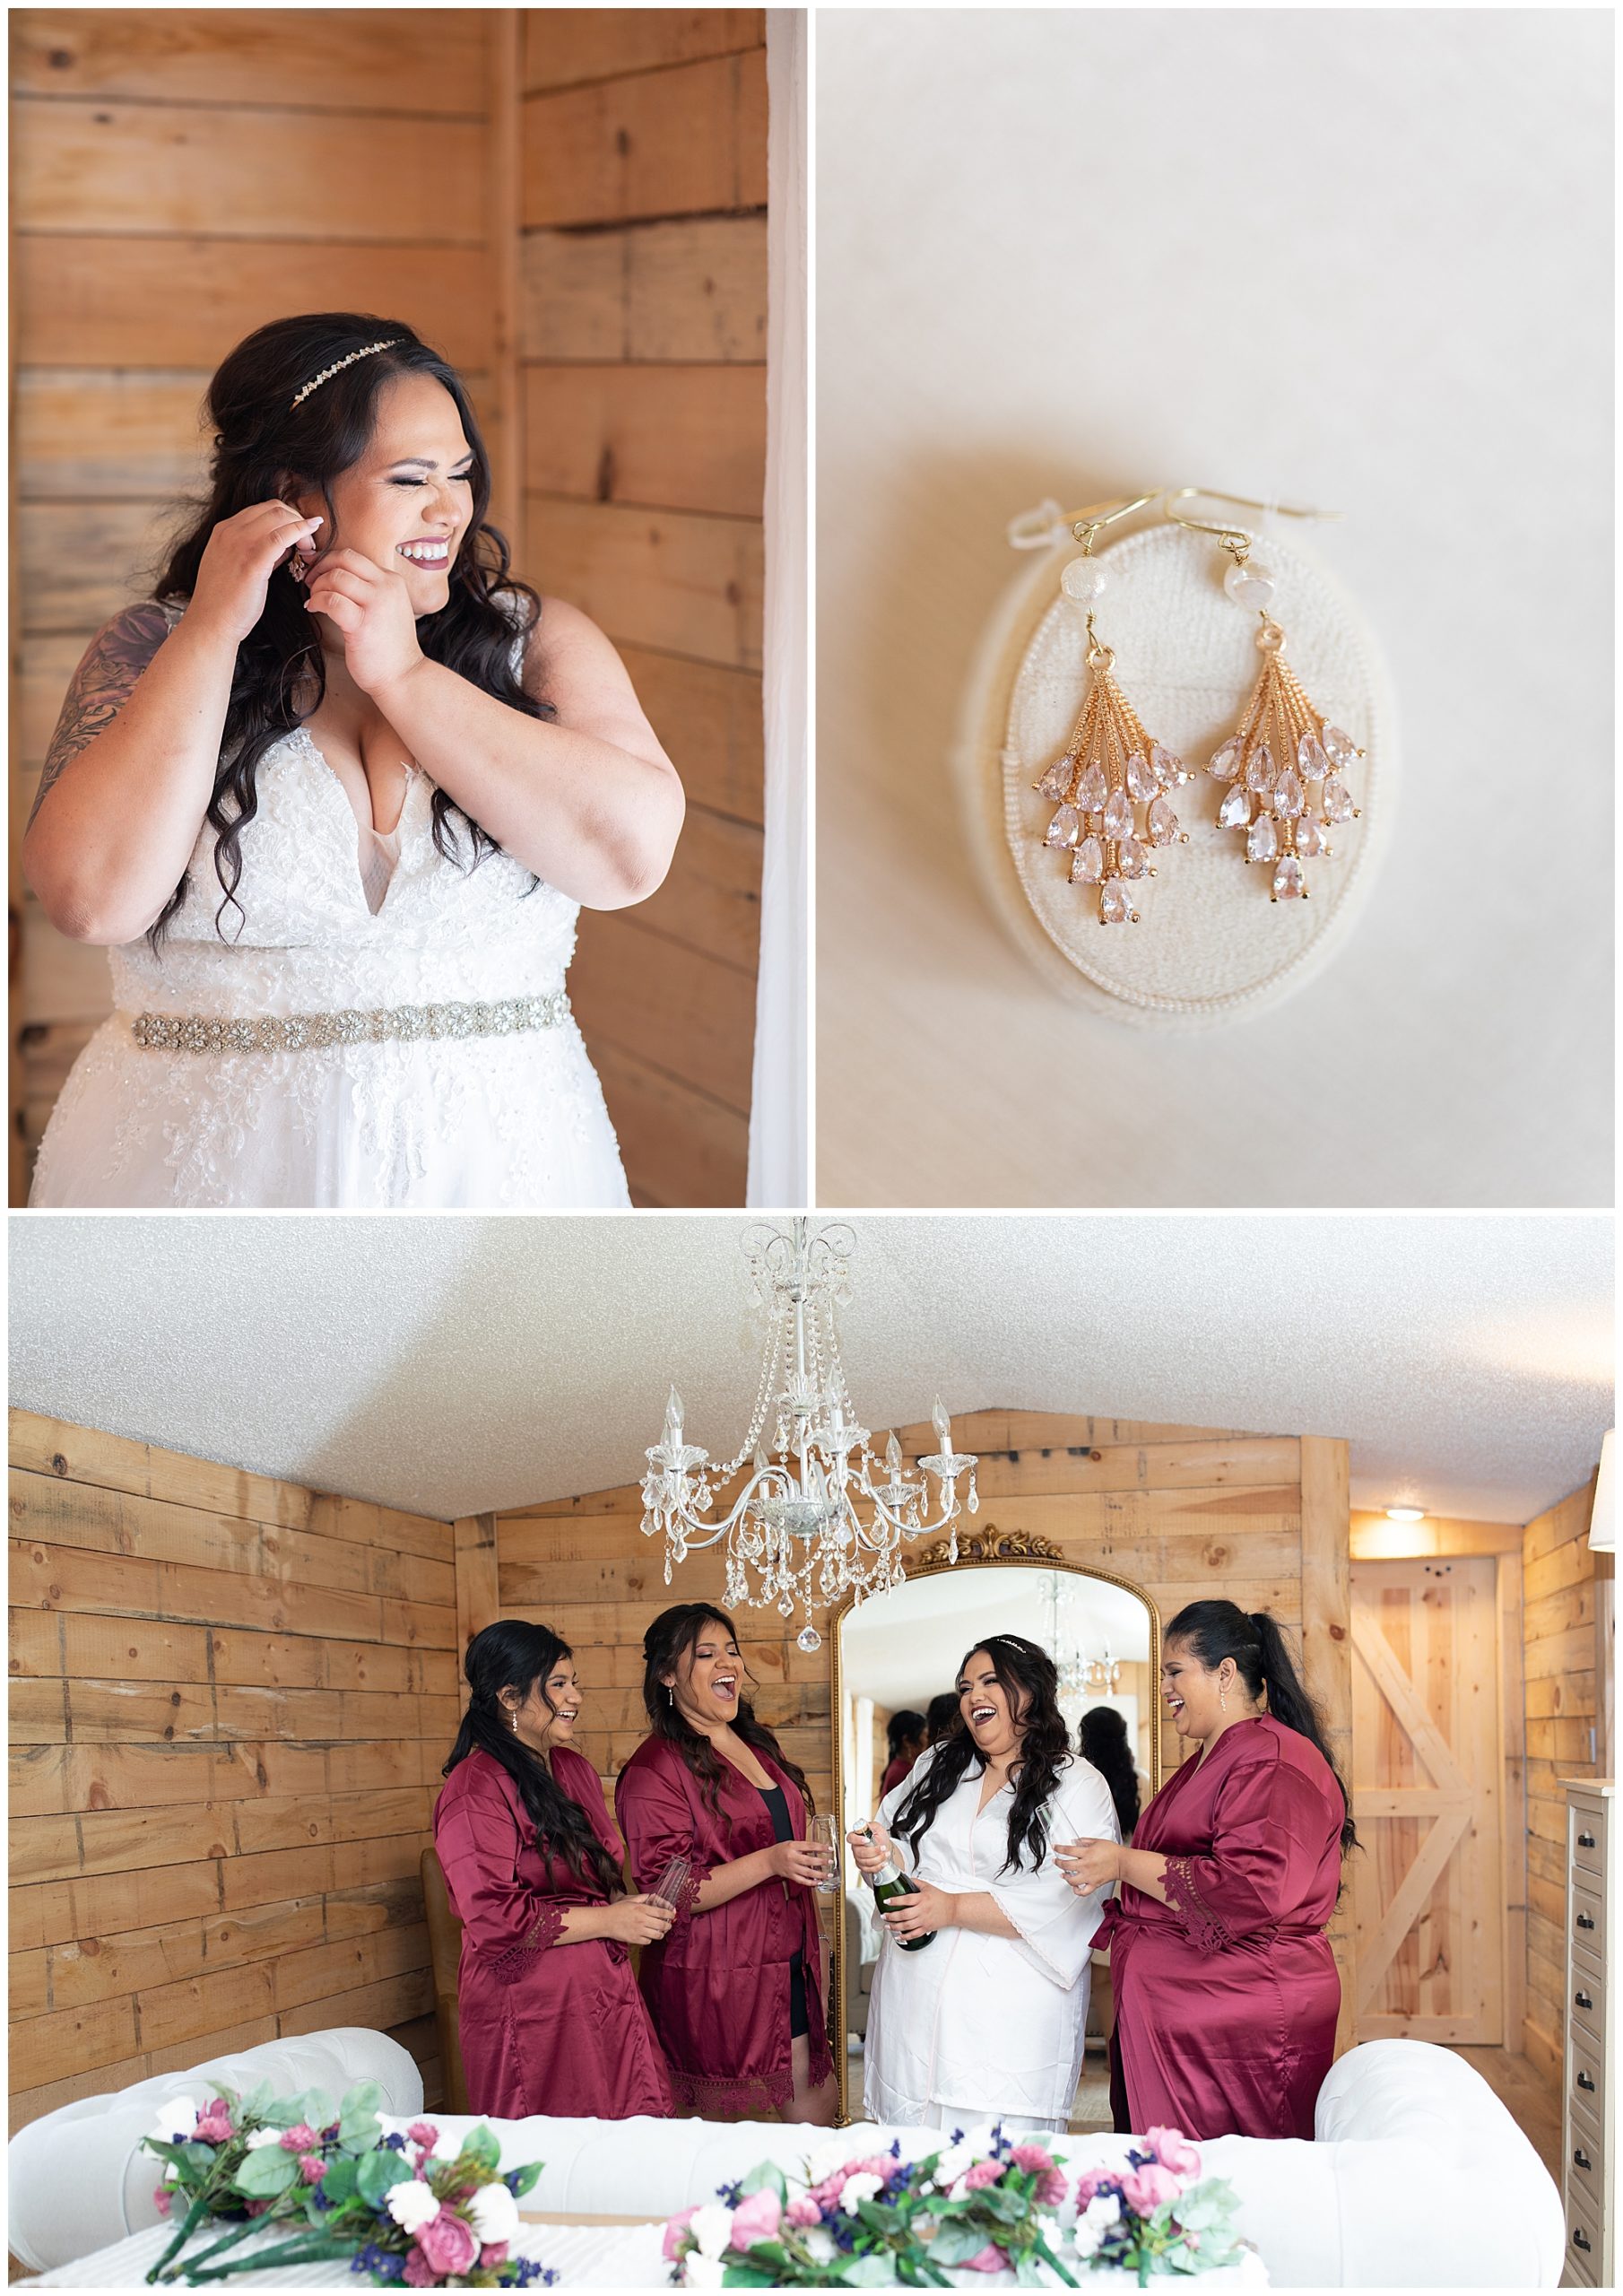 Brides getting ready for their wedding day at The Barn at Vertical Timbers